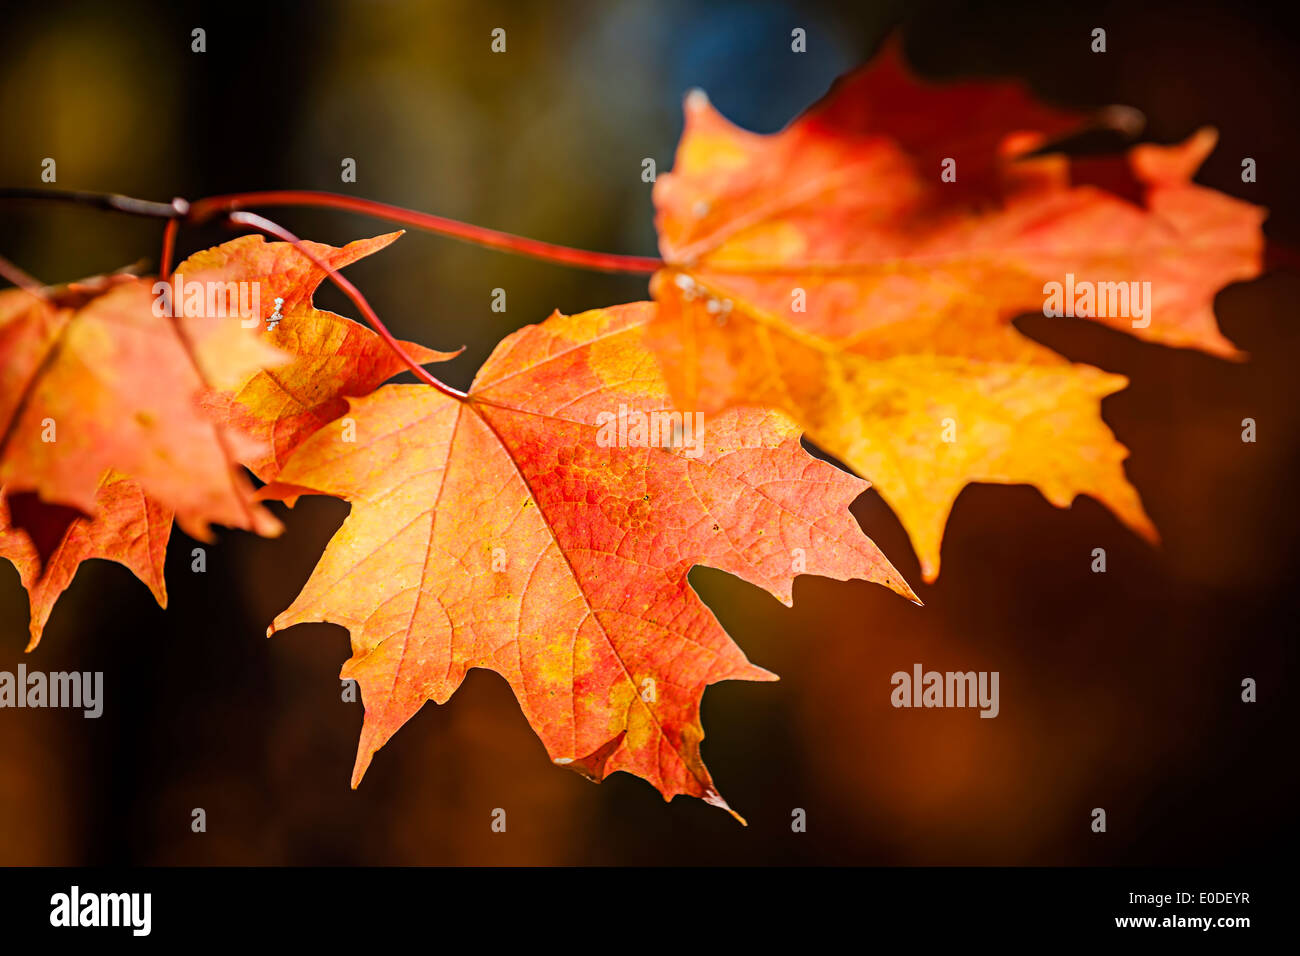 Closeup on red fall maple leaves glowing in autumn sunshine Stock Photo